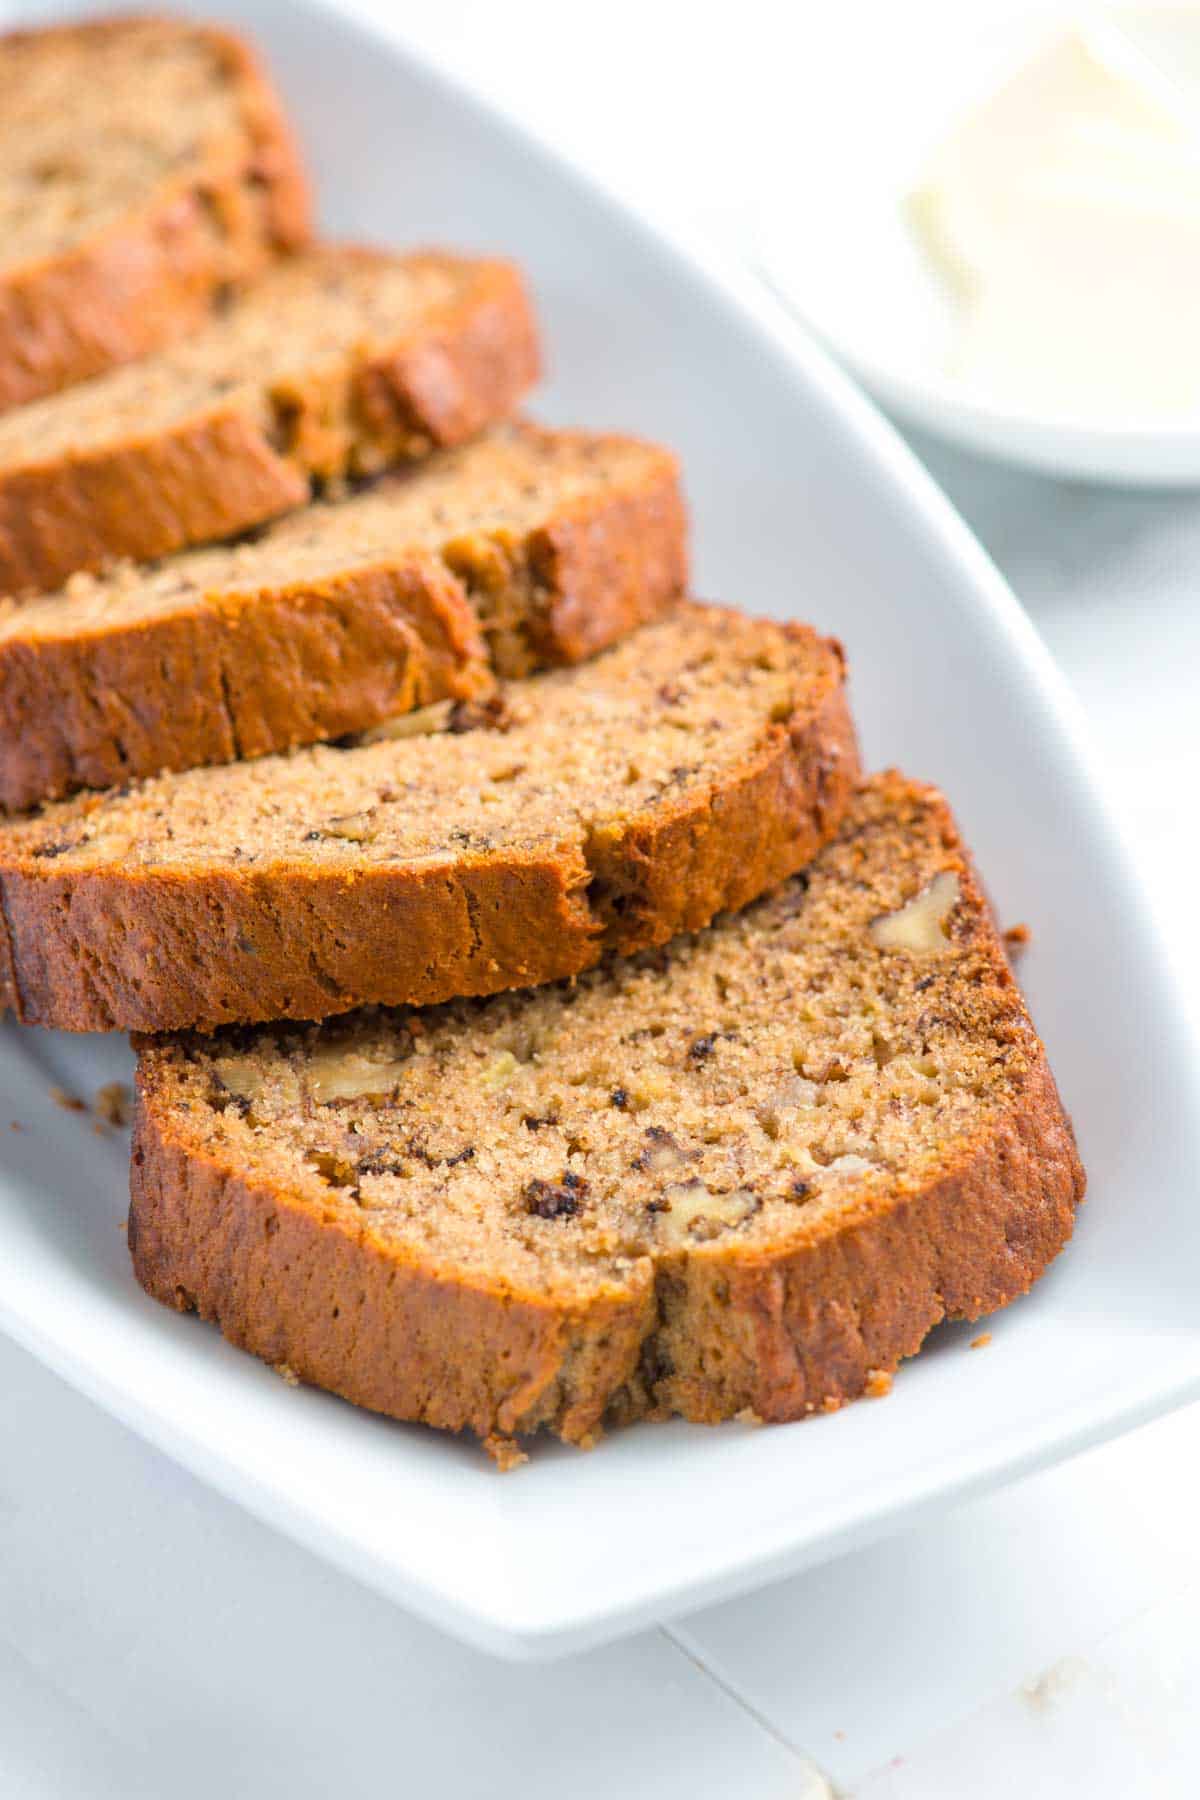 Easy One-Bowl Banana Cake - Cook Fast, Eat Well